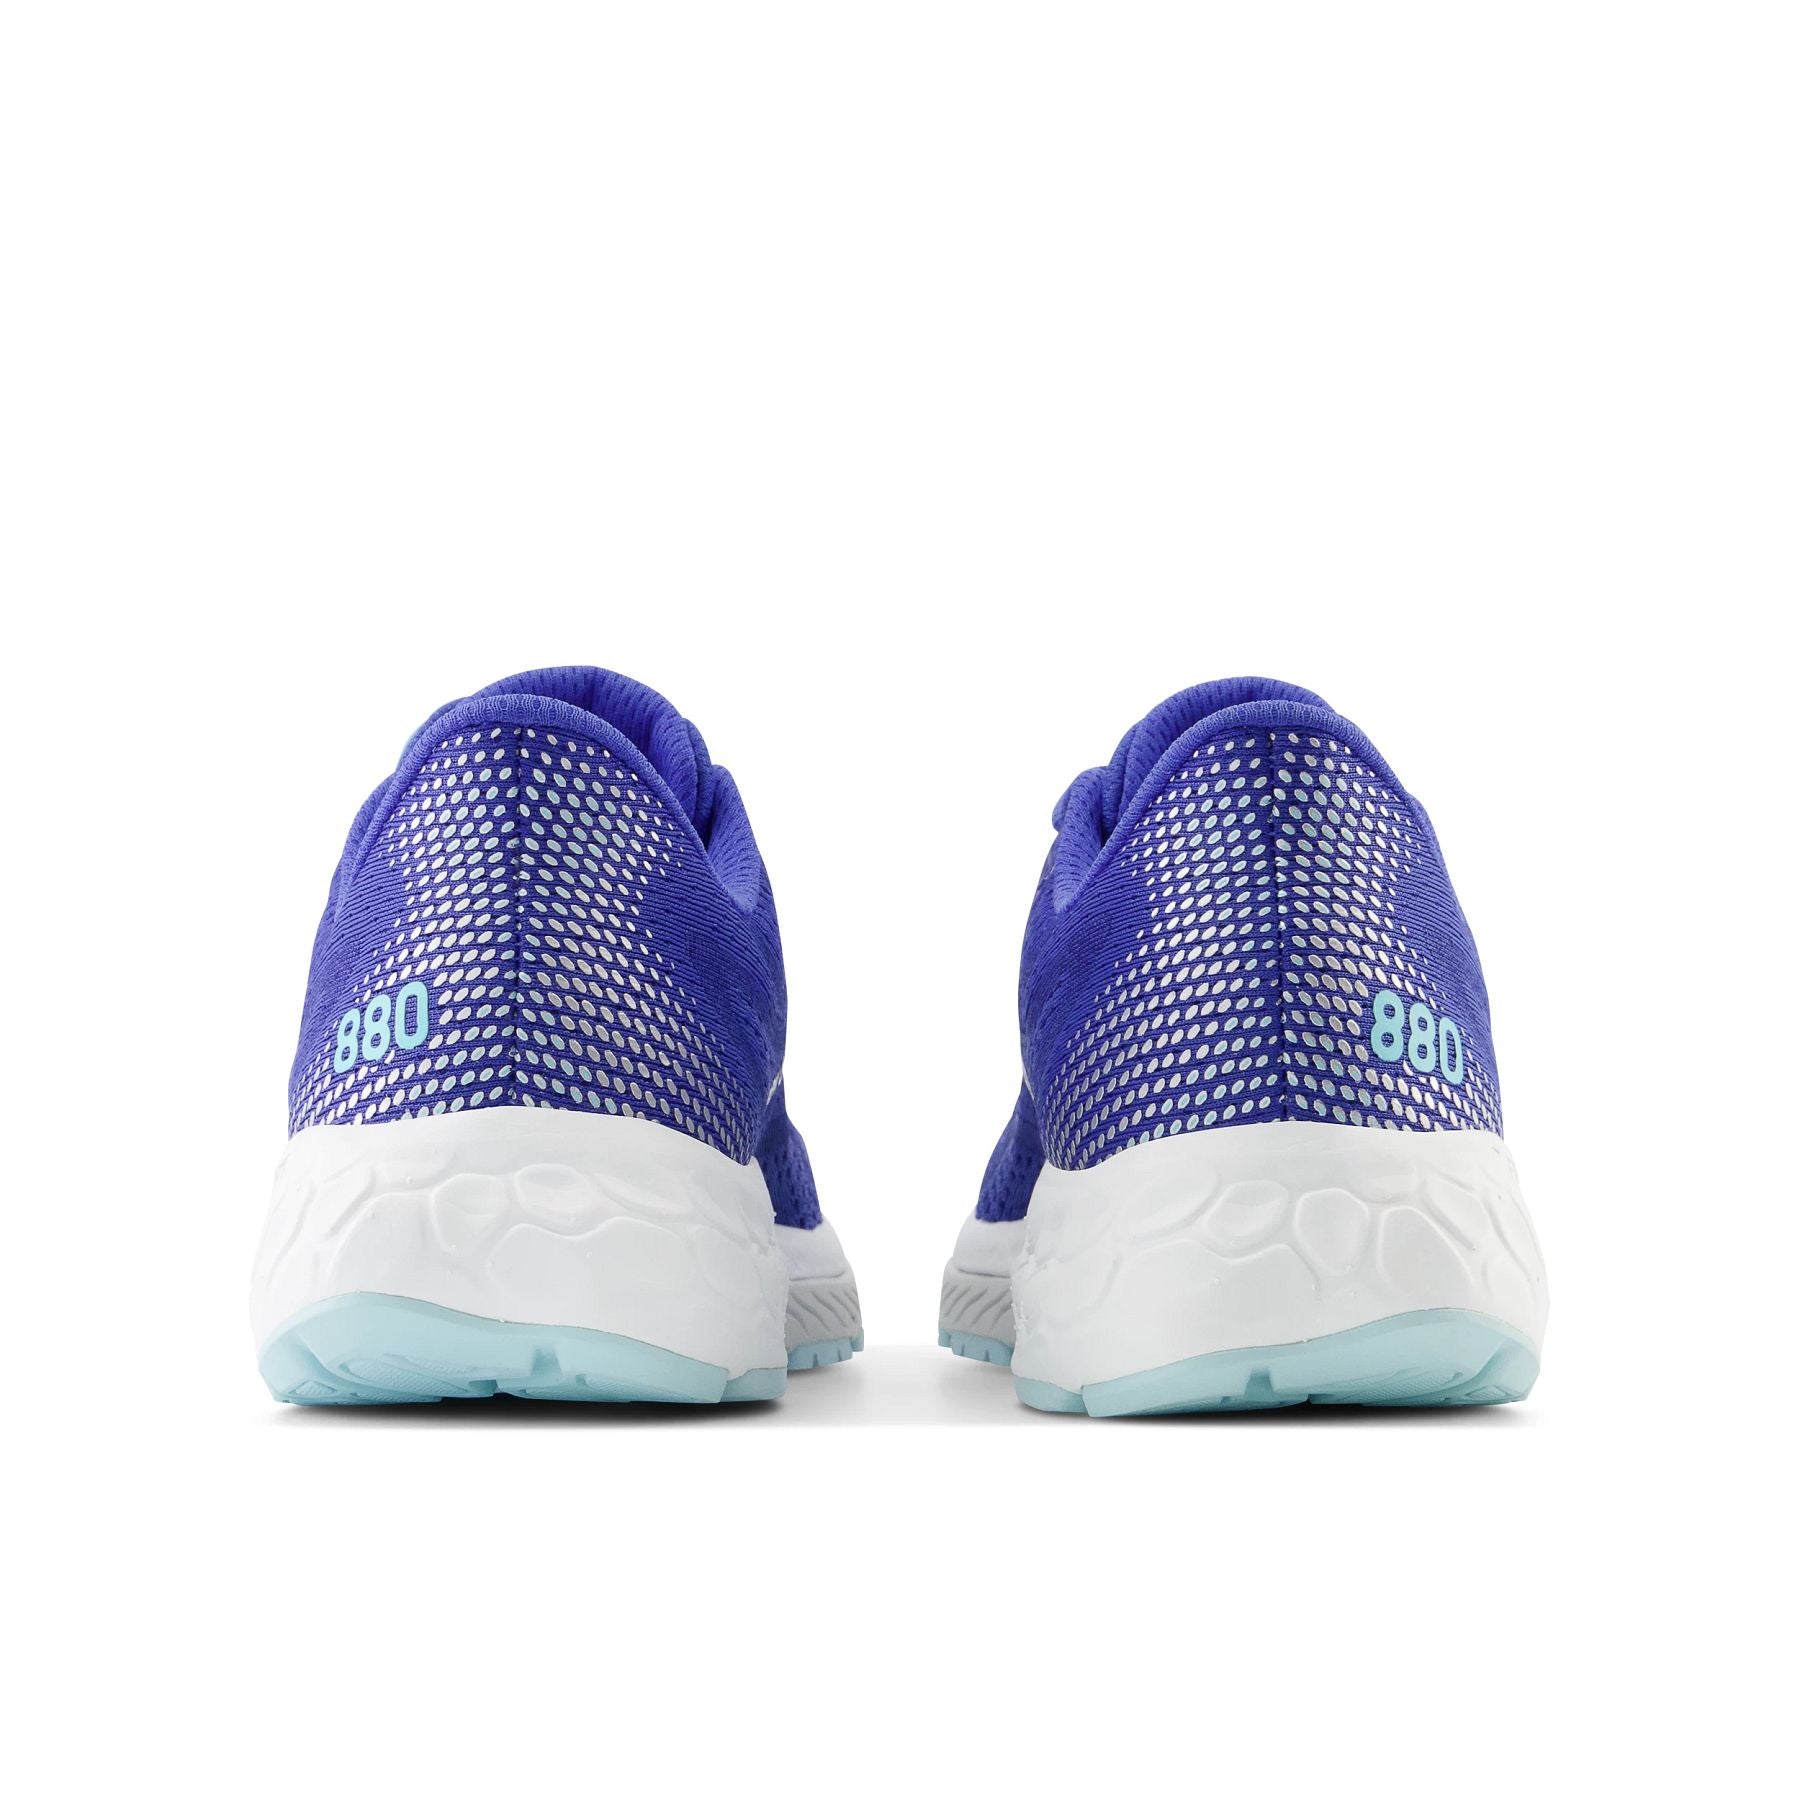 Back view of the Women's 880 V13 by New Balance in the color Marine Blue/Bright Cyan